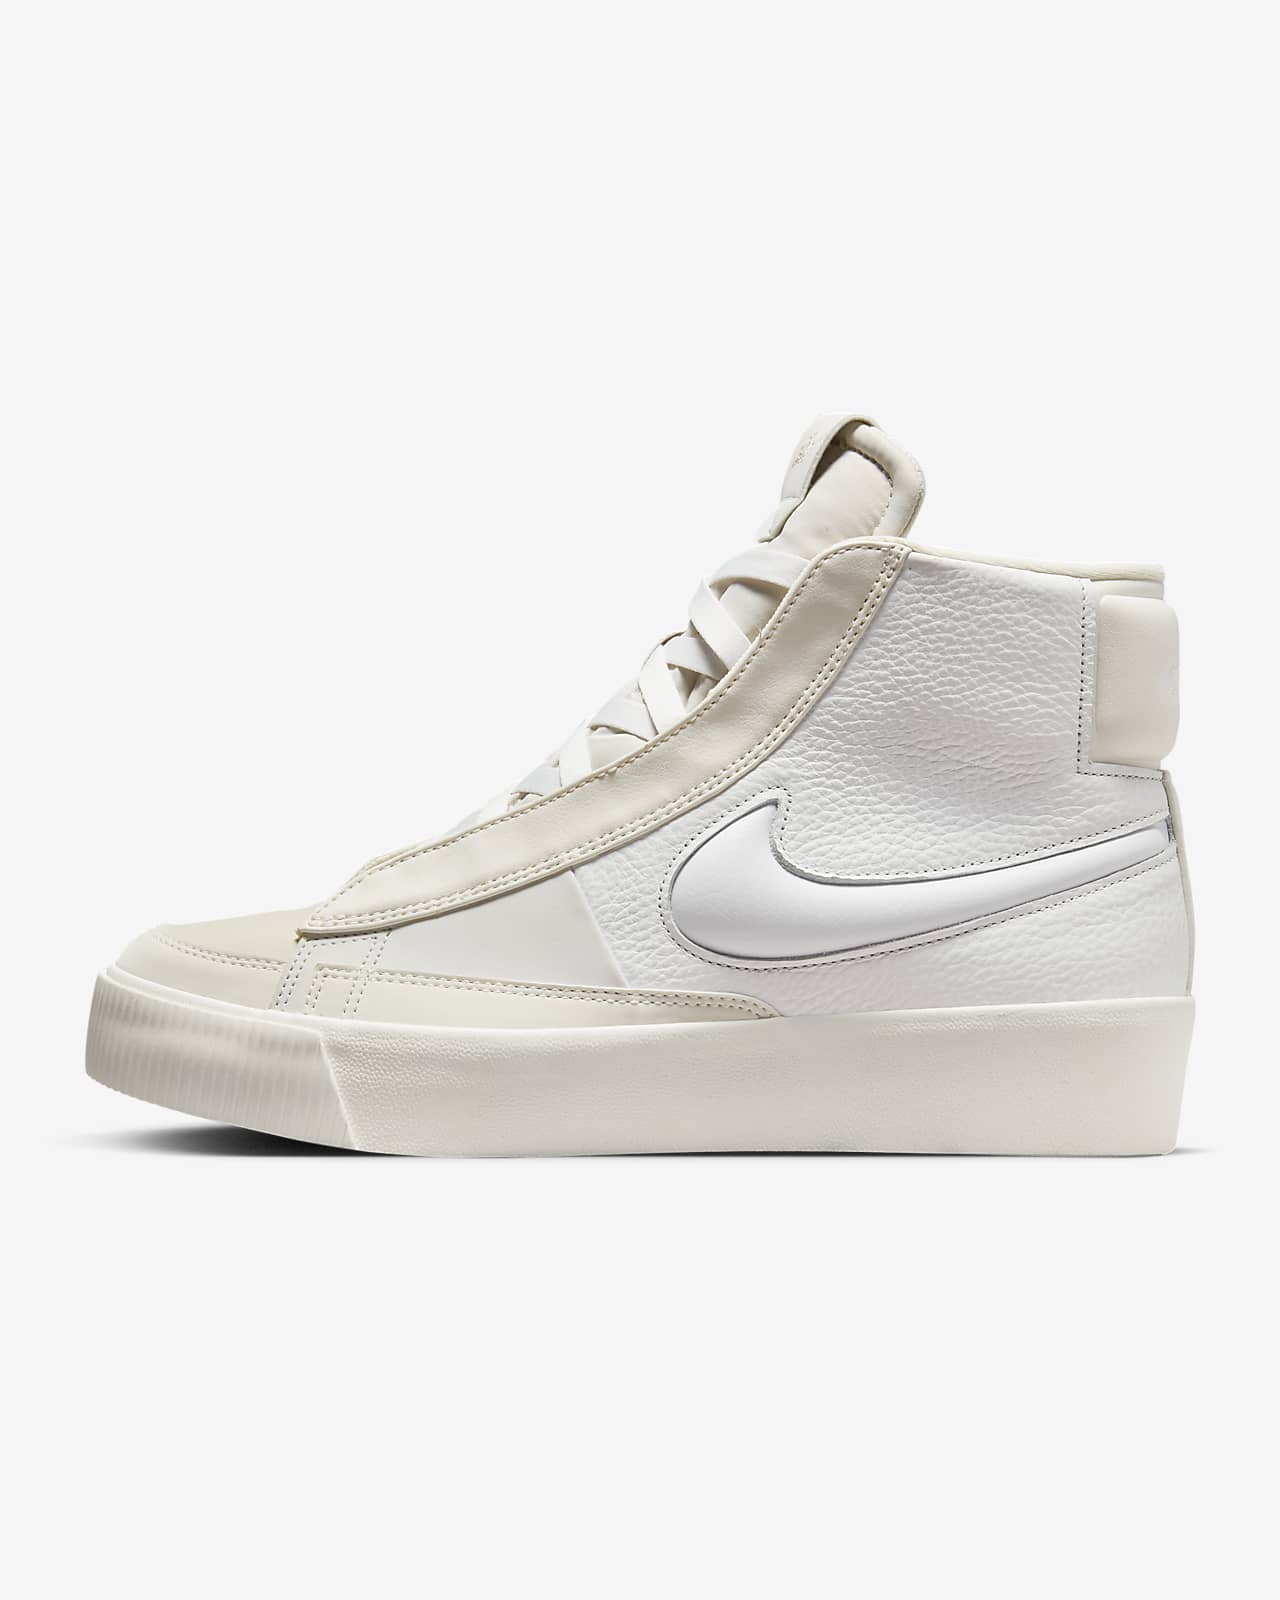 Nike Blazer Mid Victory Womens Shoes Review